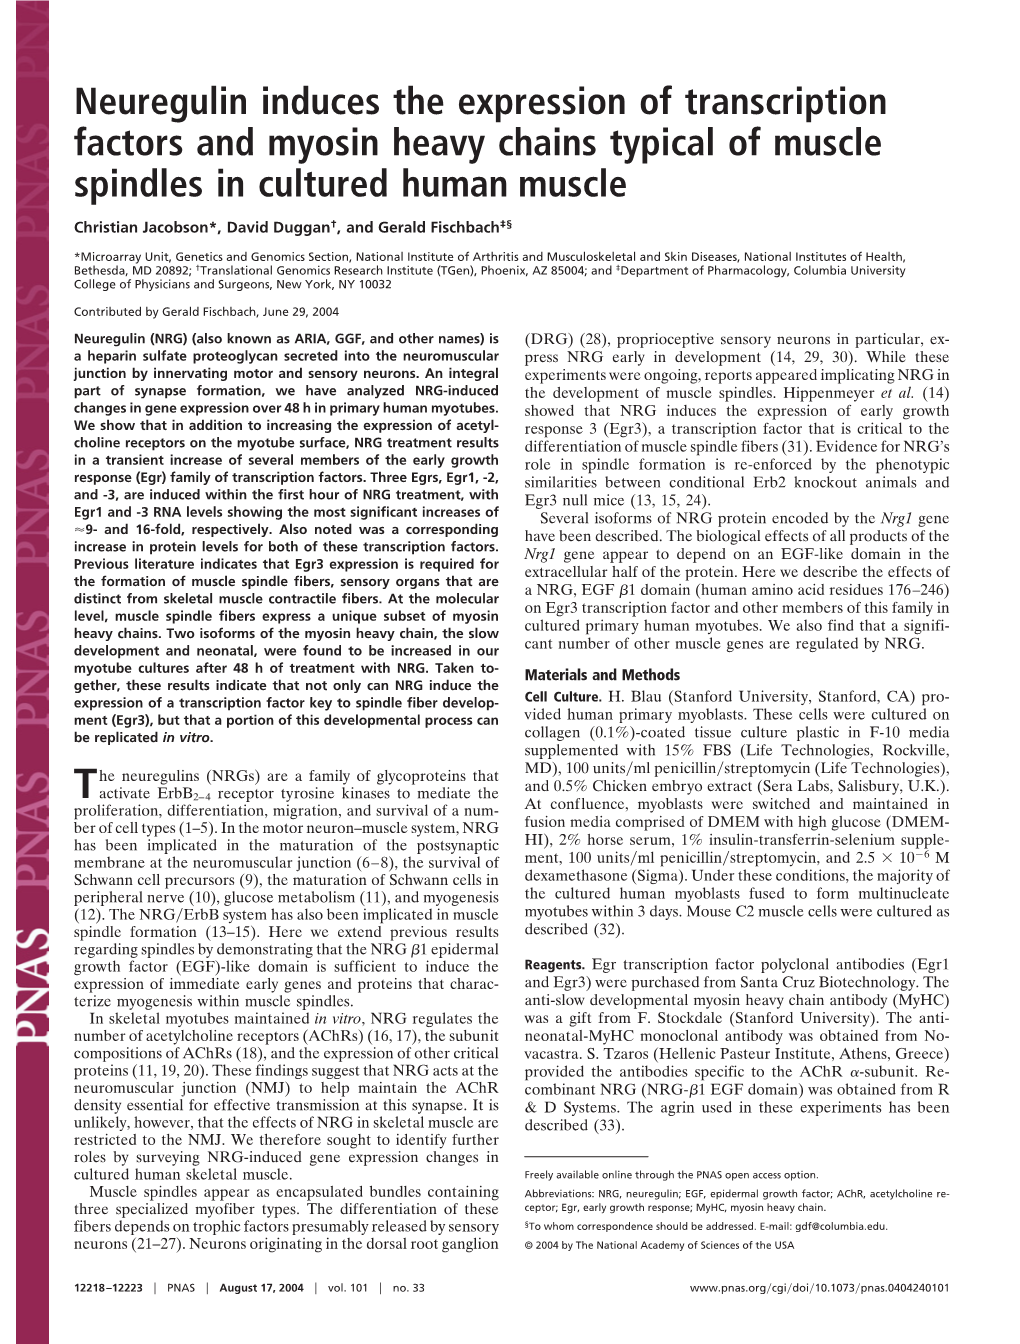 Neuregulin Induces the Expression of Transcription Factors and Myosin Heavy Chains Typical of Muscle Spindles in Cultured Human Muscle